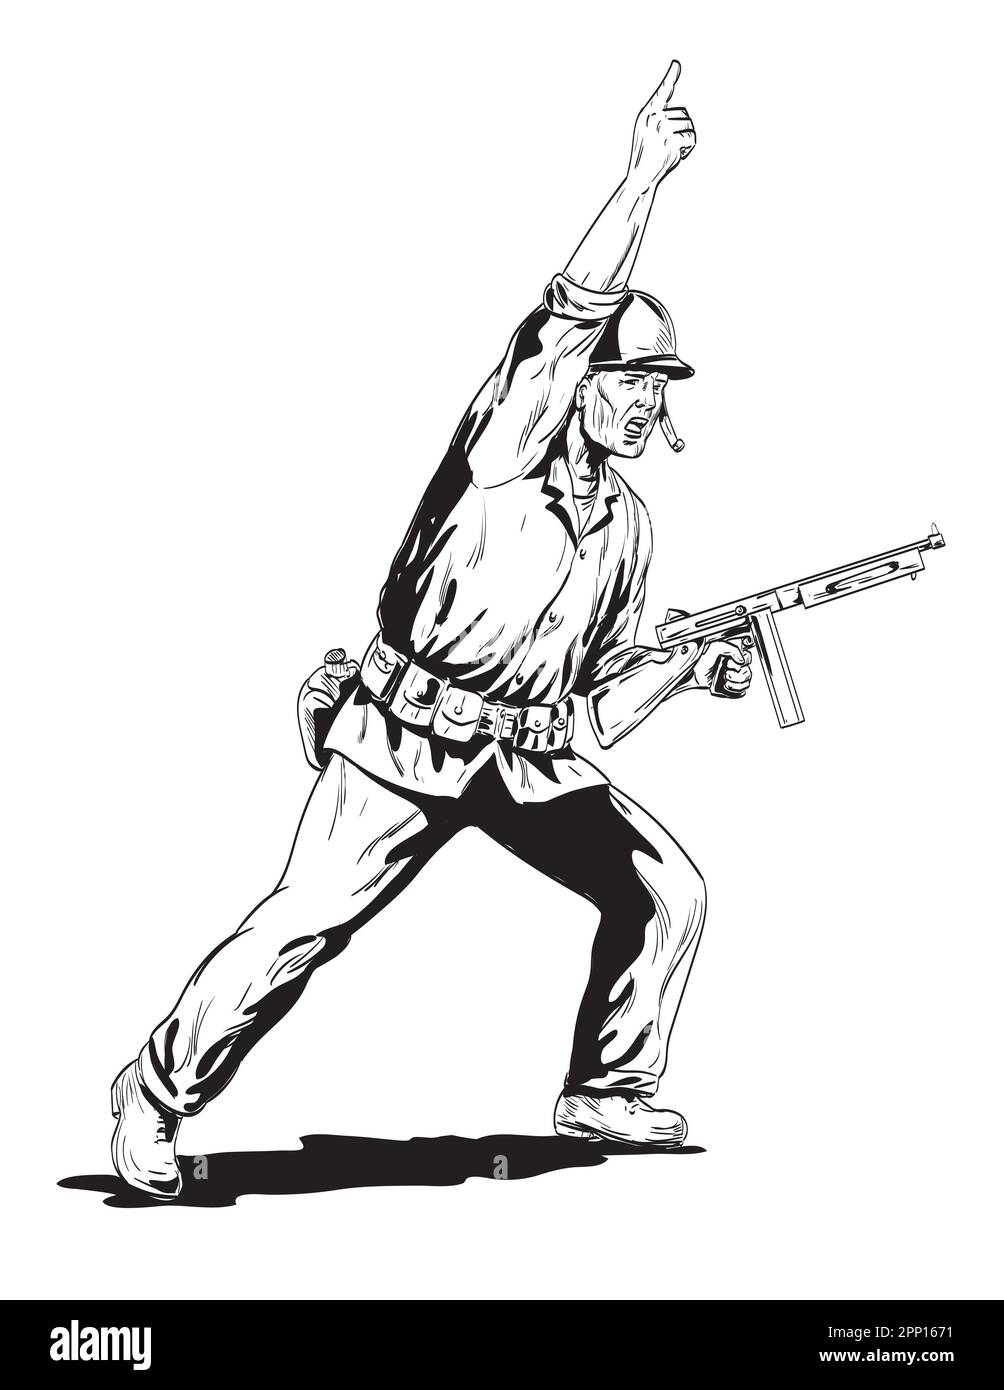 Comics style drawing or illustration of a World War Two American GI soldier with rifle leading charge viewed from side angle on isolated background do Stock Photo